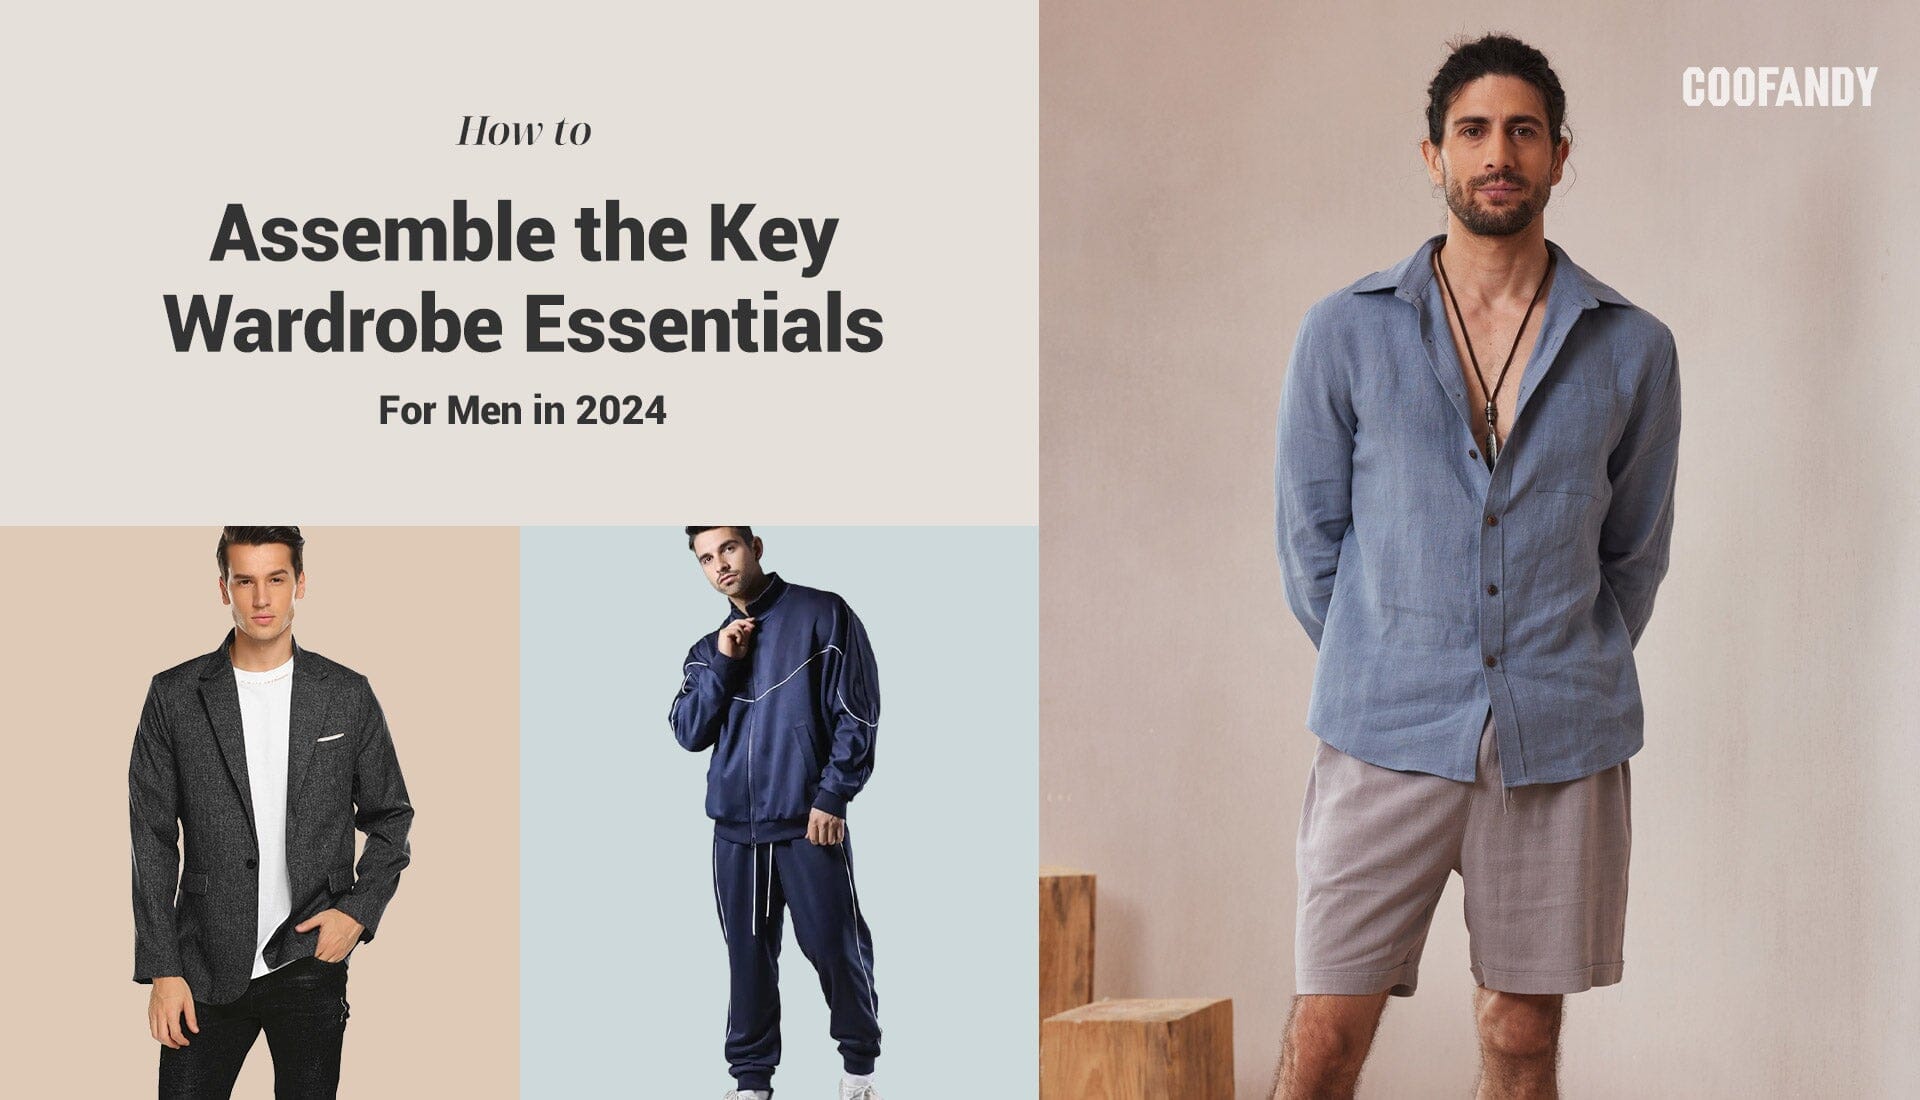 4 Key Essentials to Update and Modernize Outfits